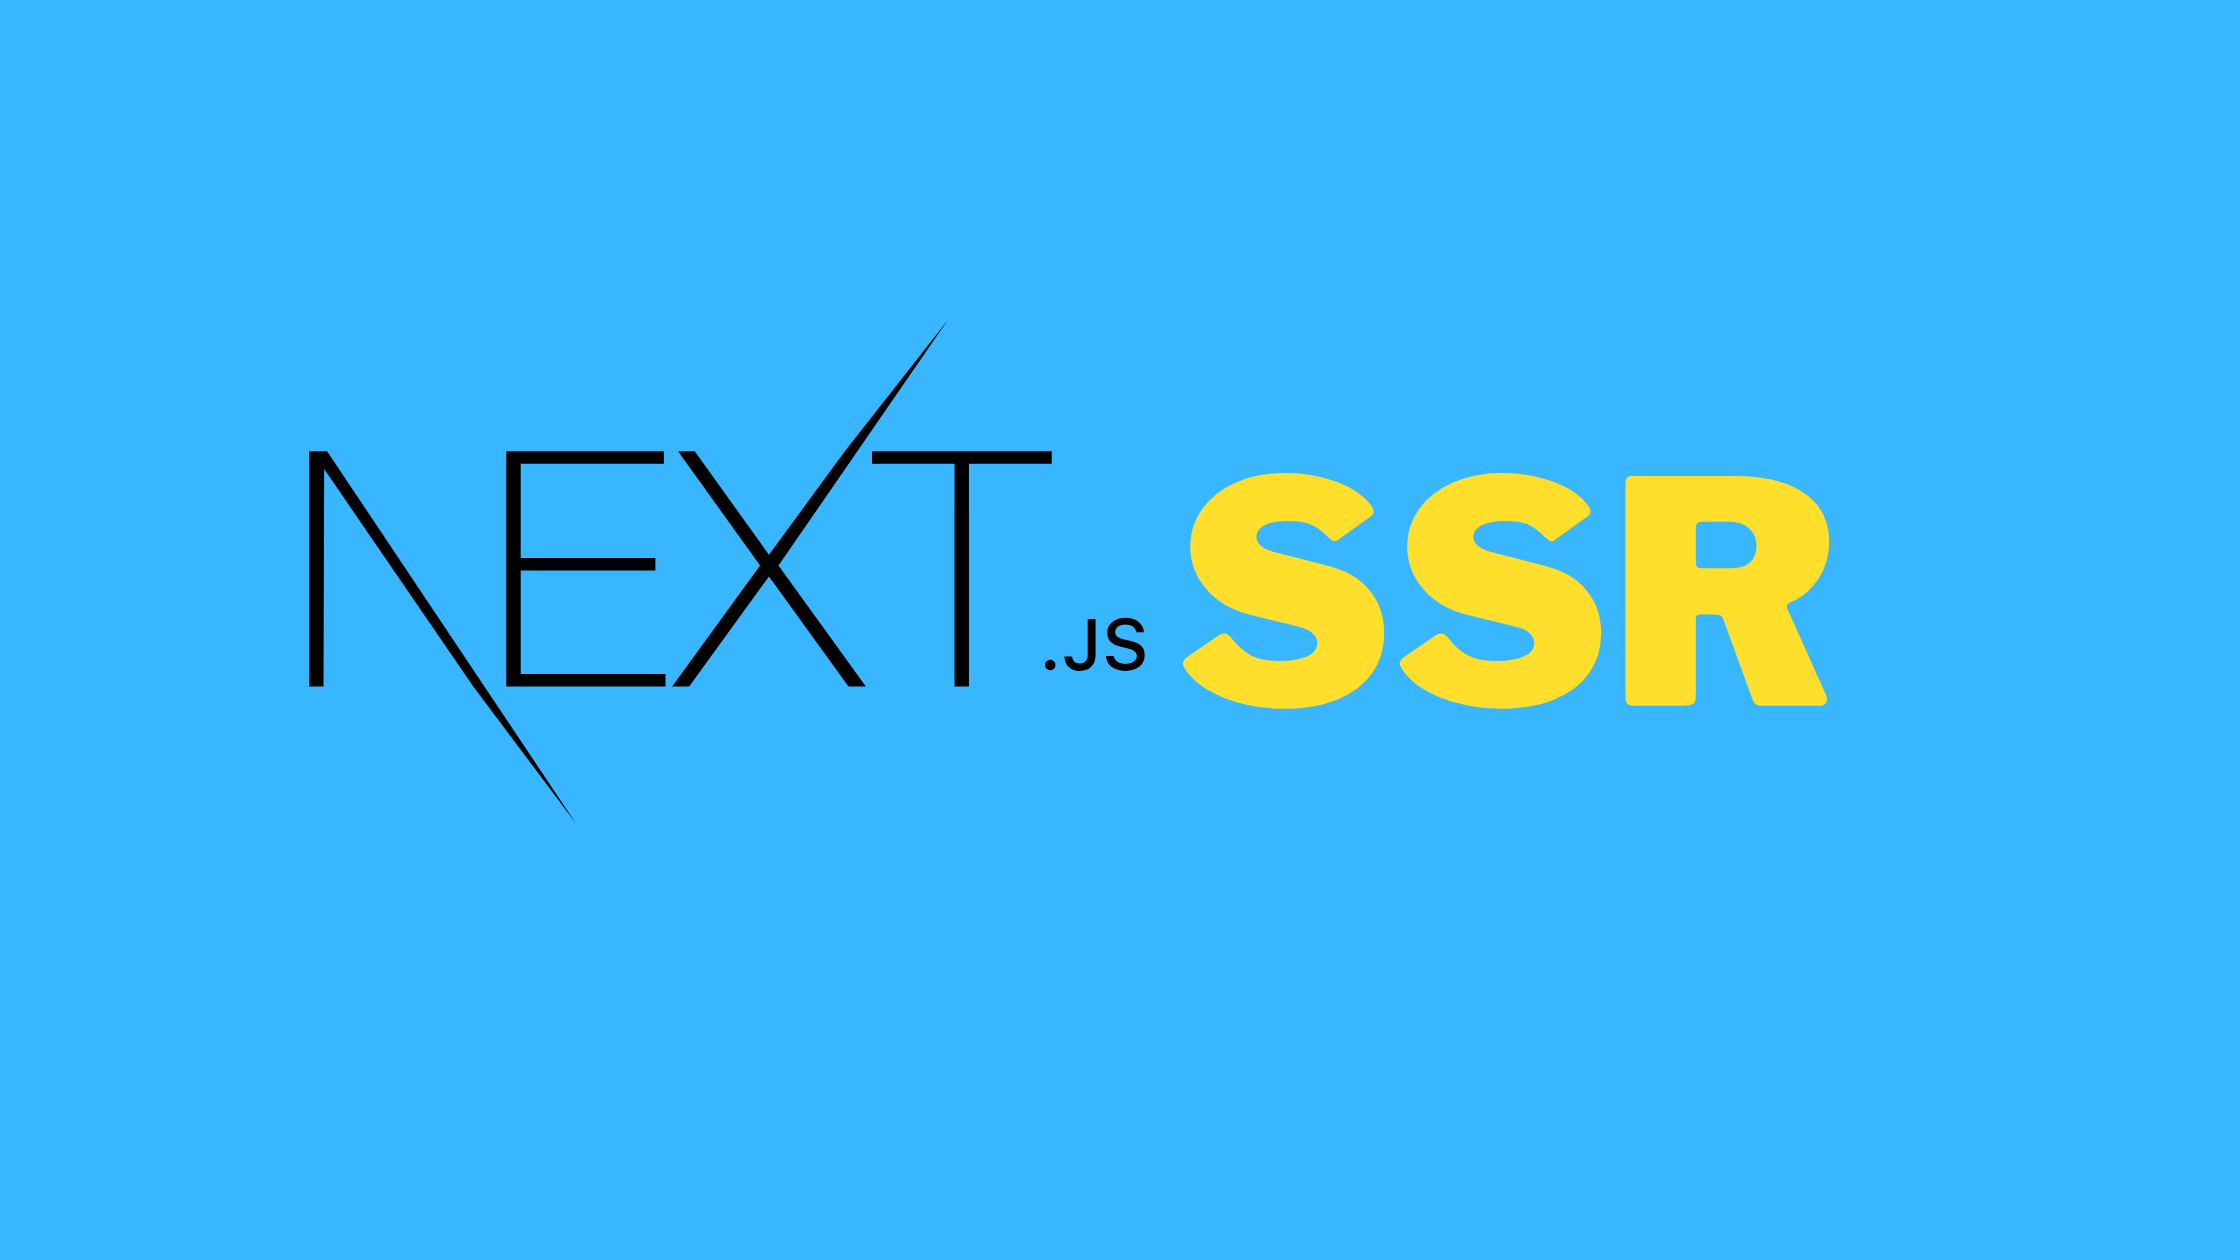 How to make SSR application using Next.js ?